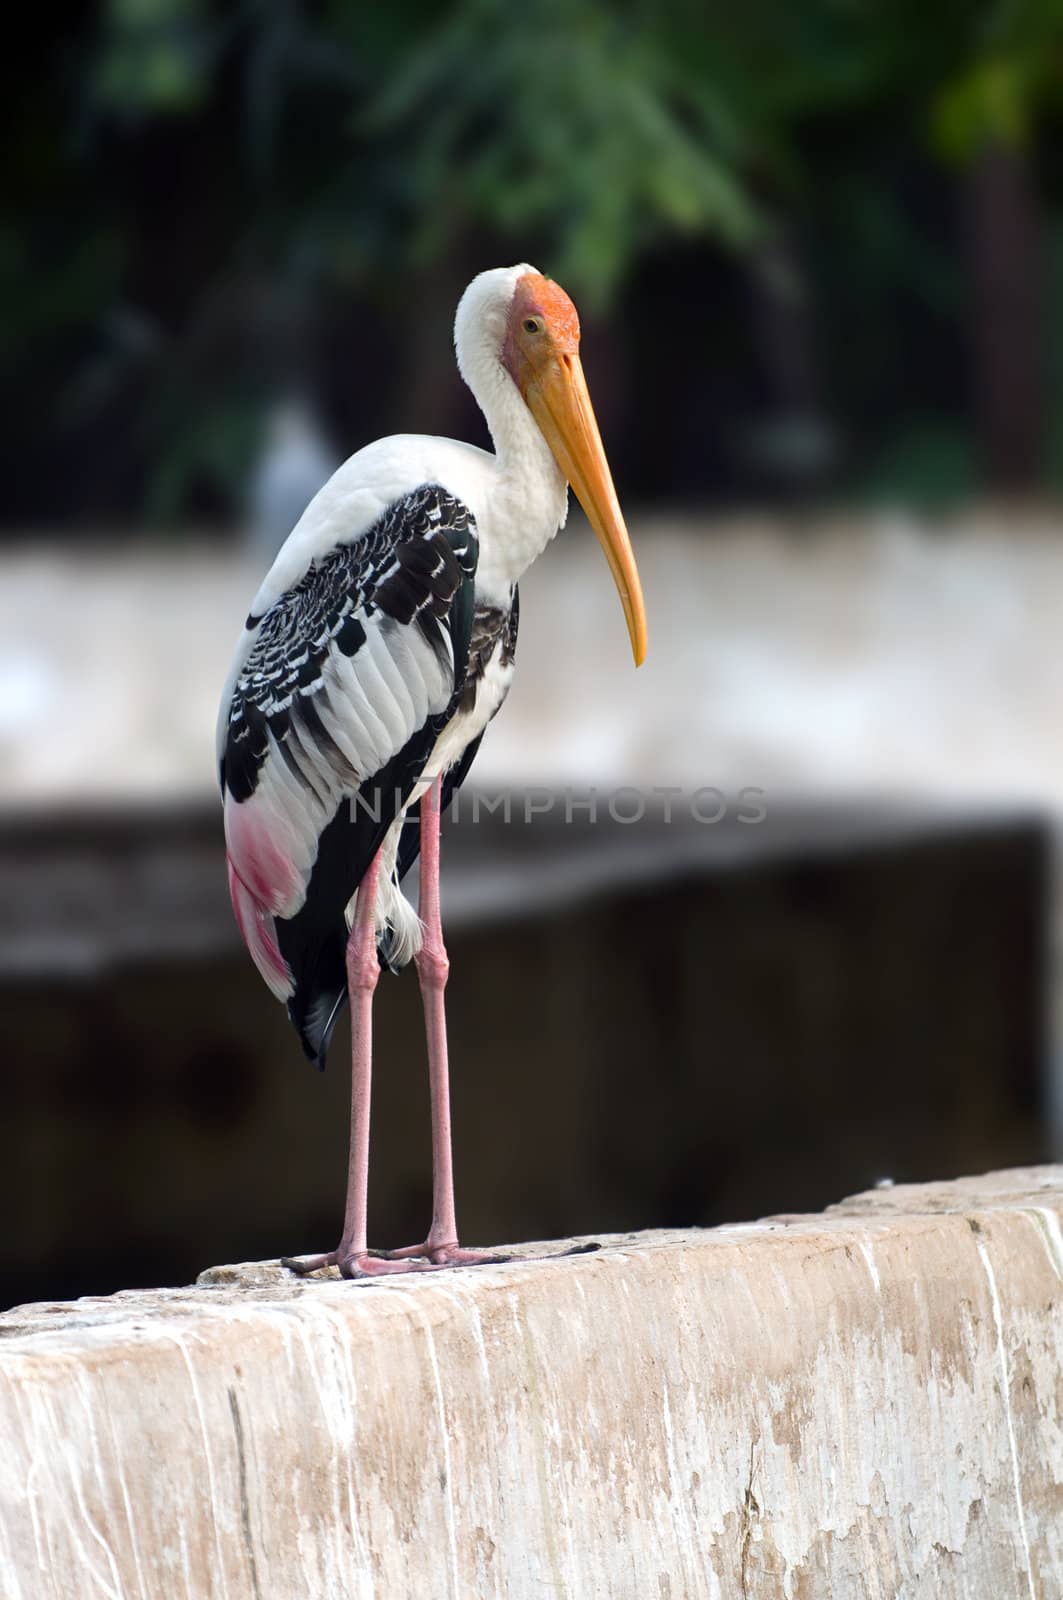 A beautiful painted stork at a local zoo under captive